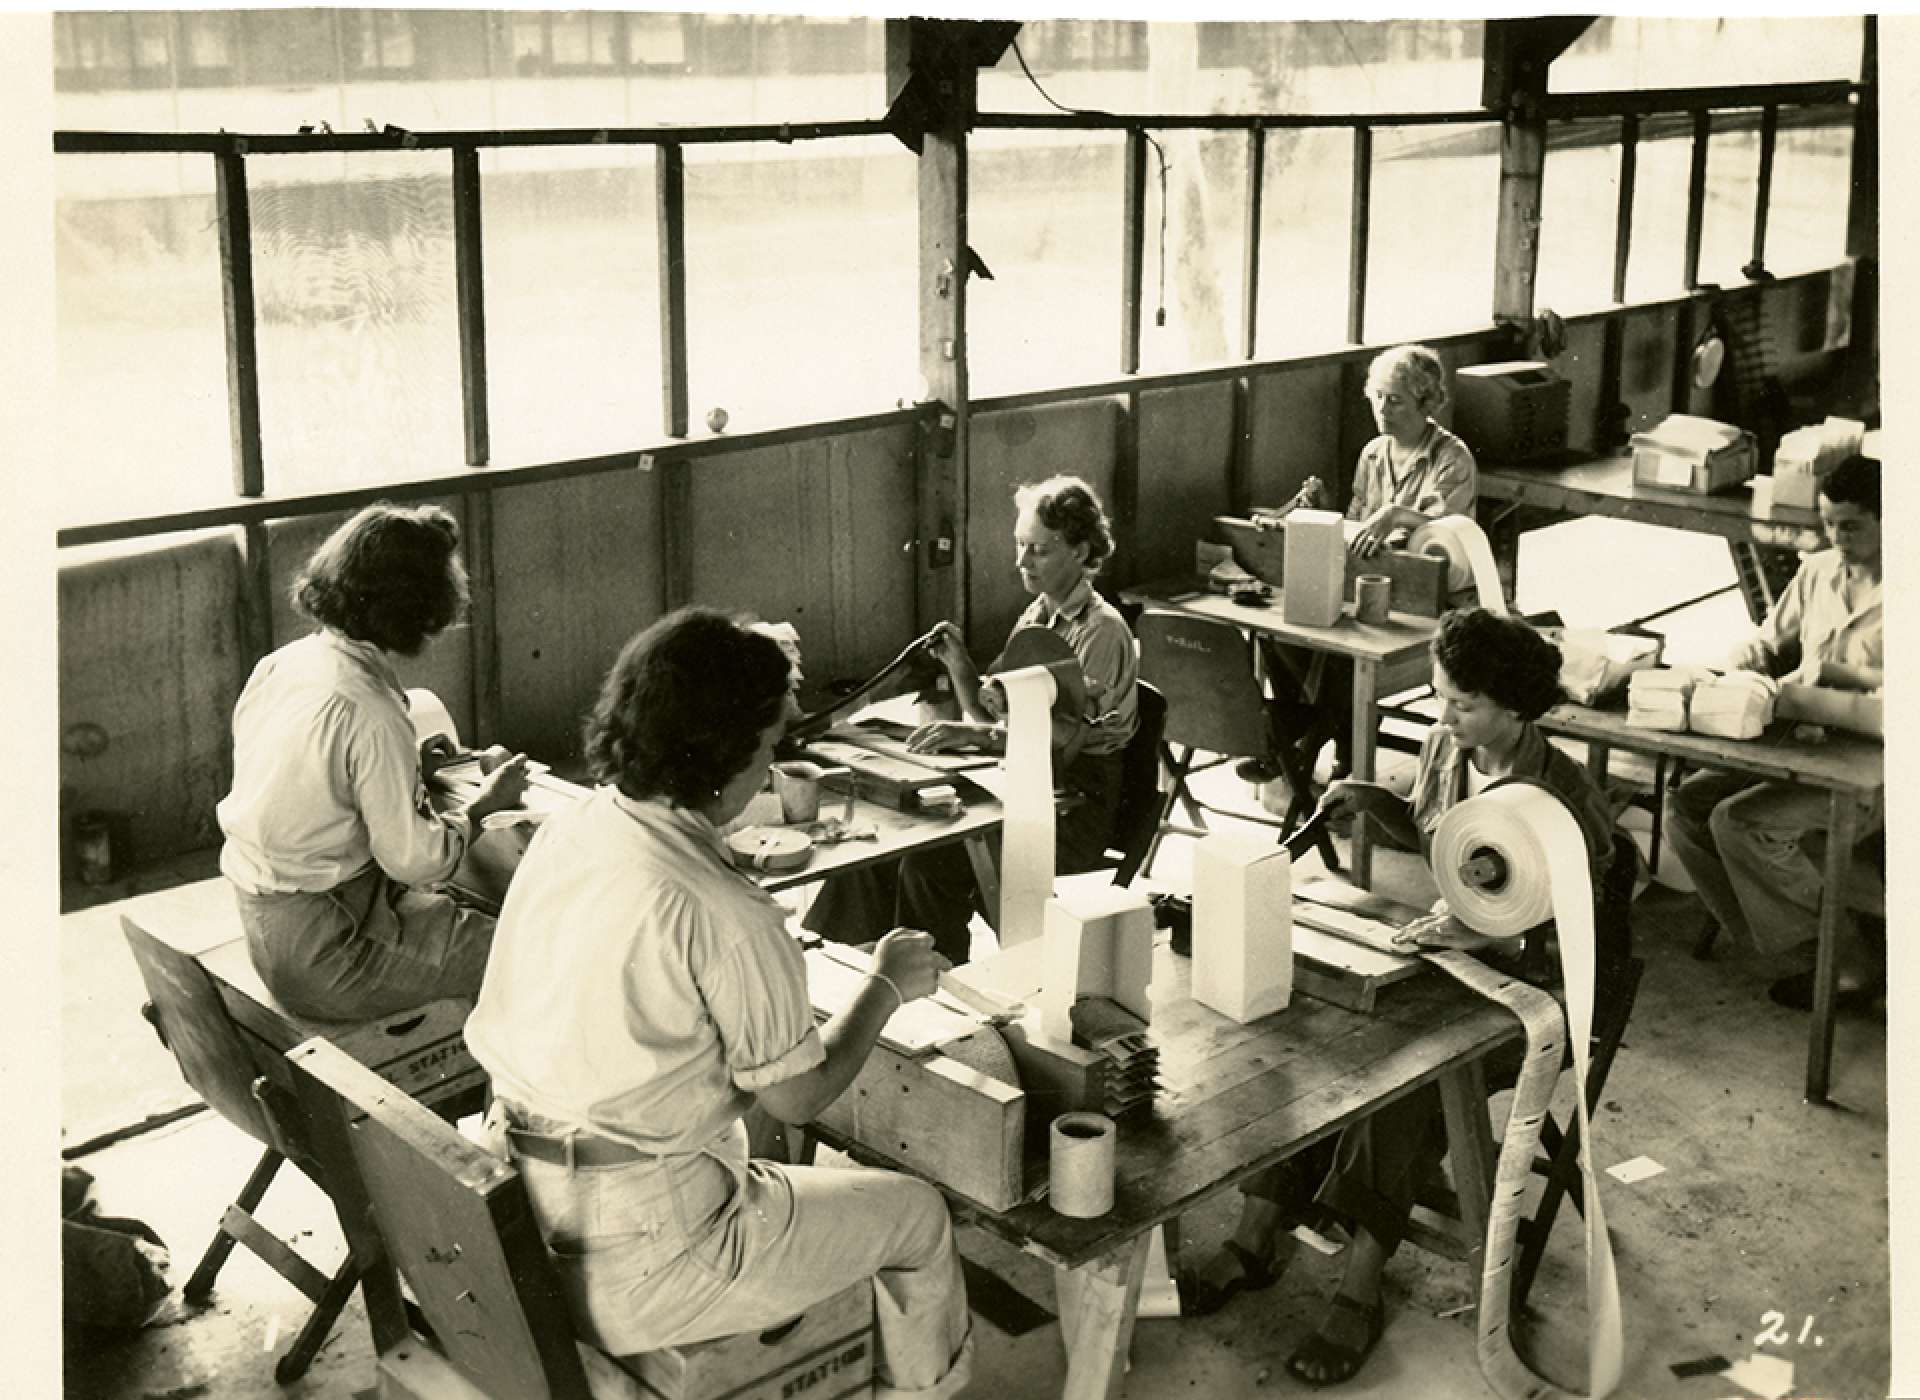 V-mail operation in the field at APO 929. “Paper chopping. At these choppers each letter is handcut from the roll and here the culls or bad letters are pulled out. Approximately twenty minutes is required to completely chop a full roll of V-Mail.&quot; Port Moresby, Papua New Guinea. 1944